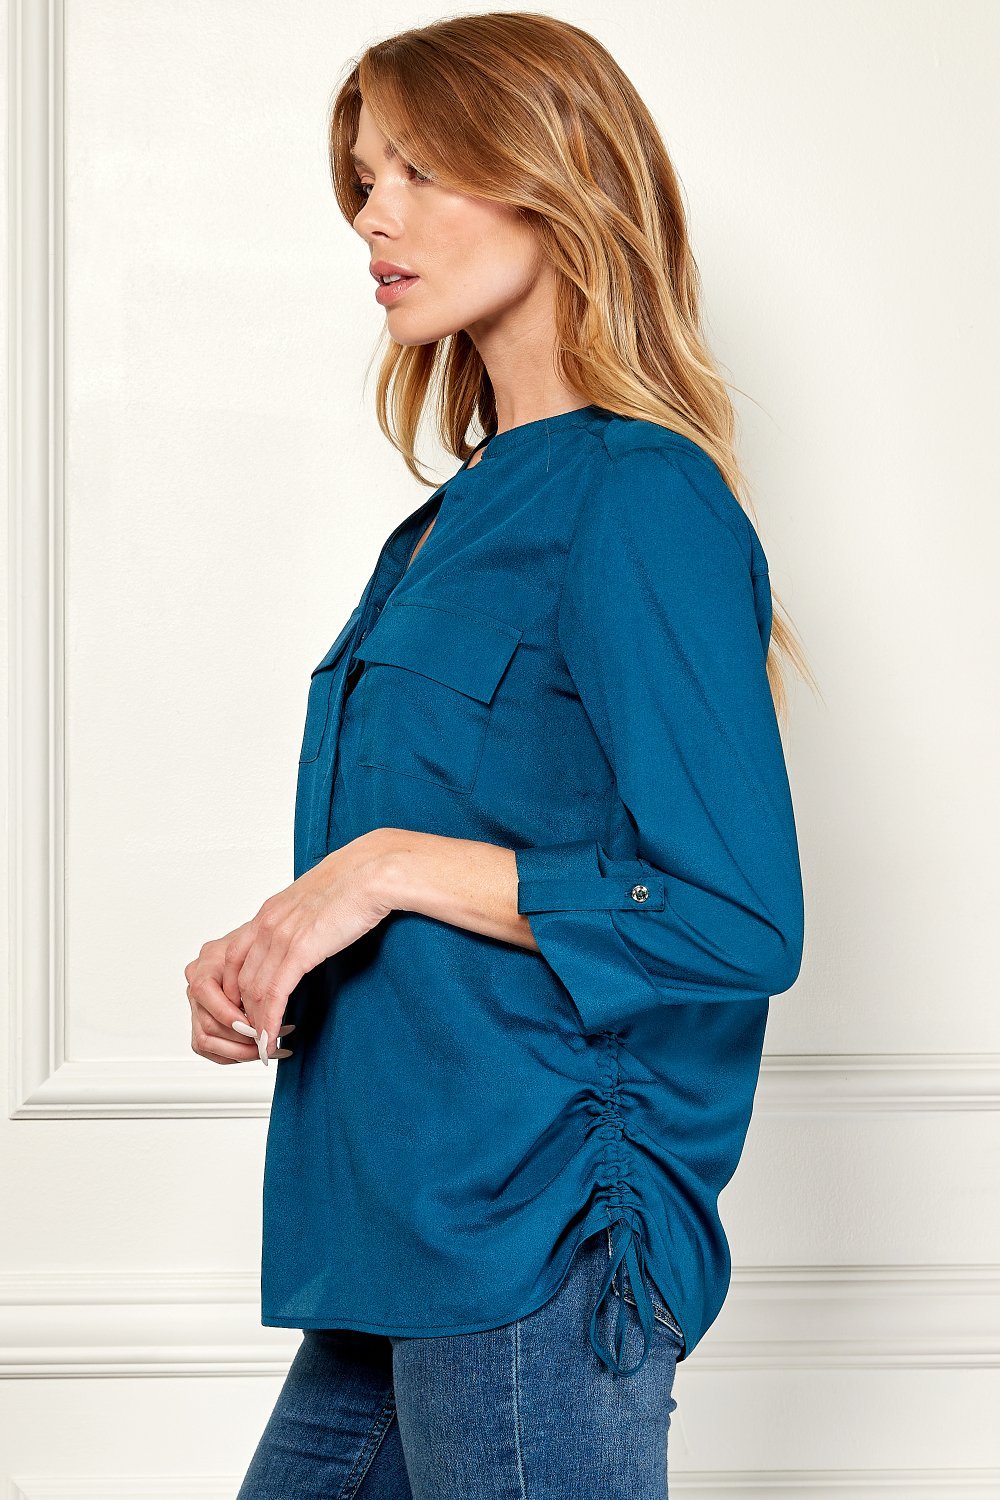 Sara Michelle 3/4 Button Tab Sleeve Patch Pockets Side Ties Popover - DressbarnShirts & Blouses